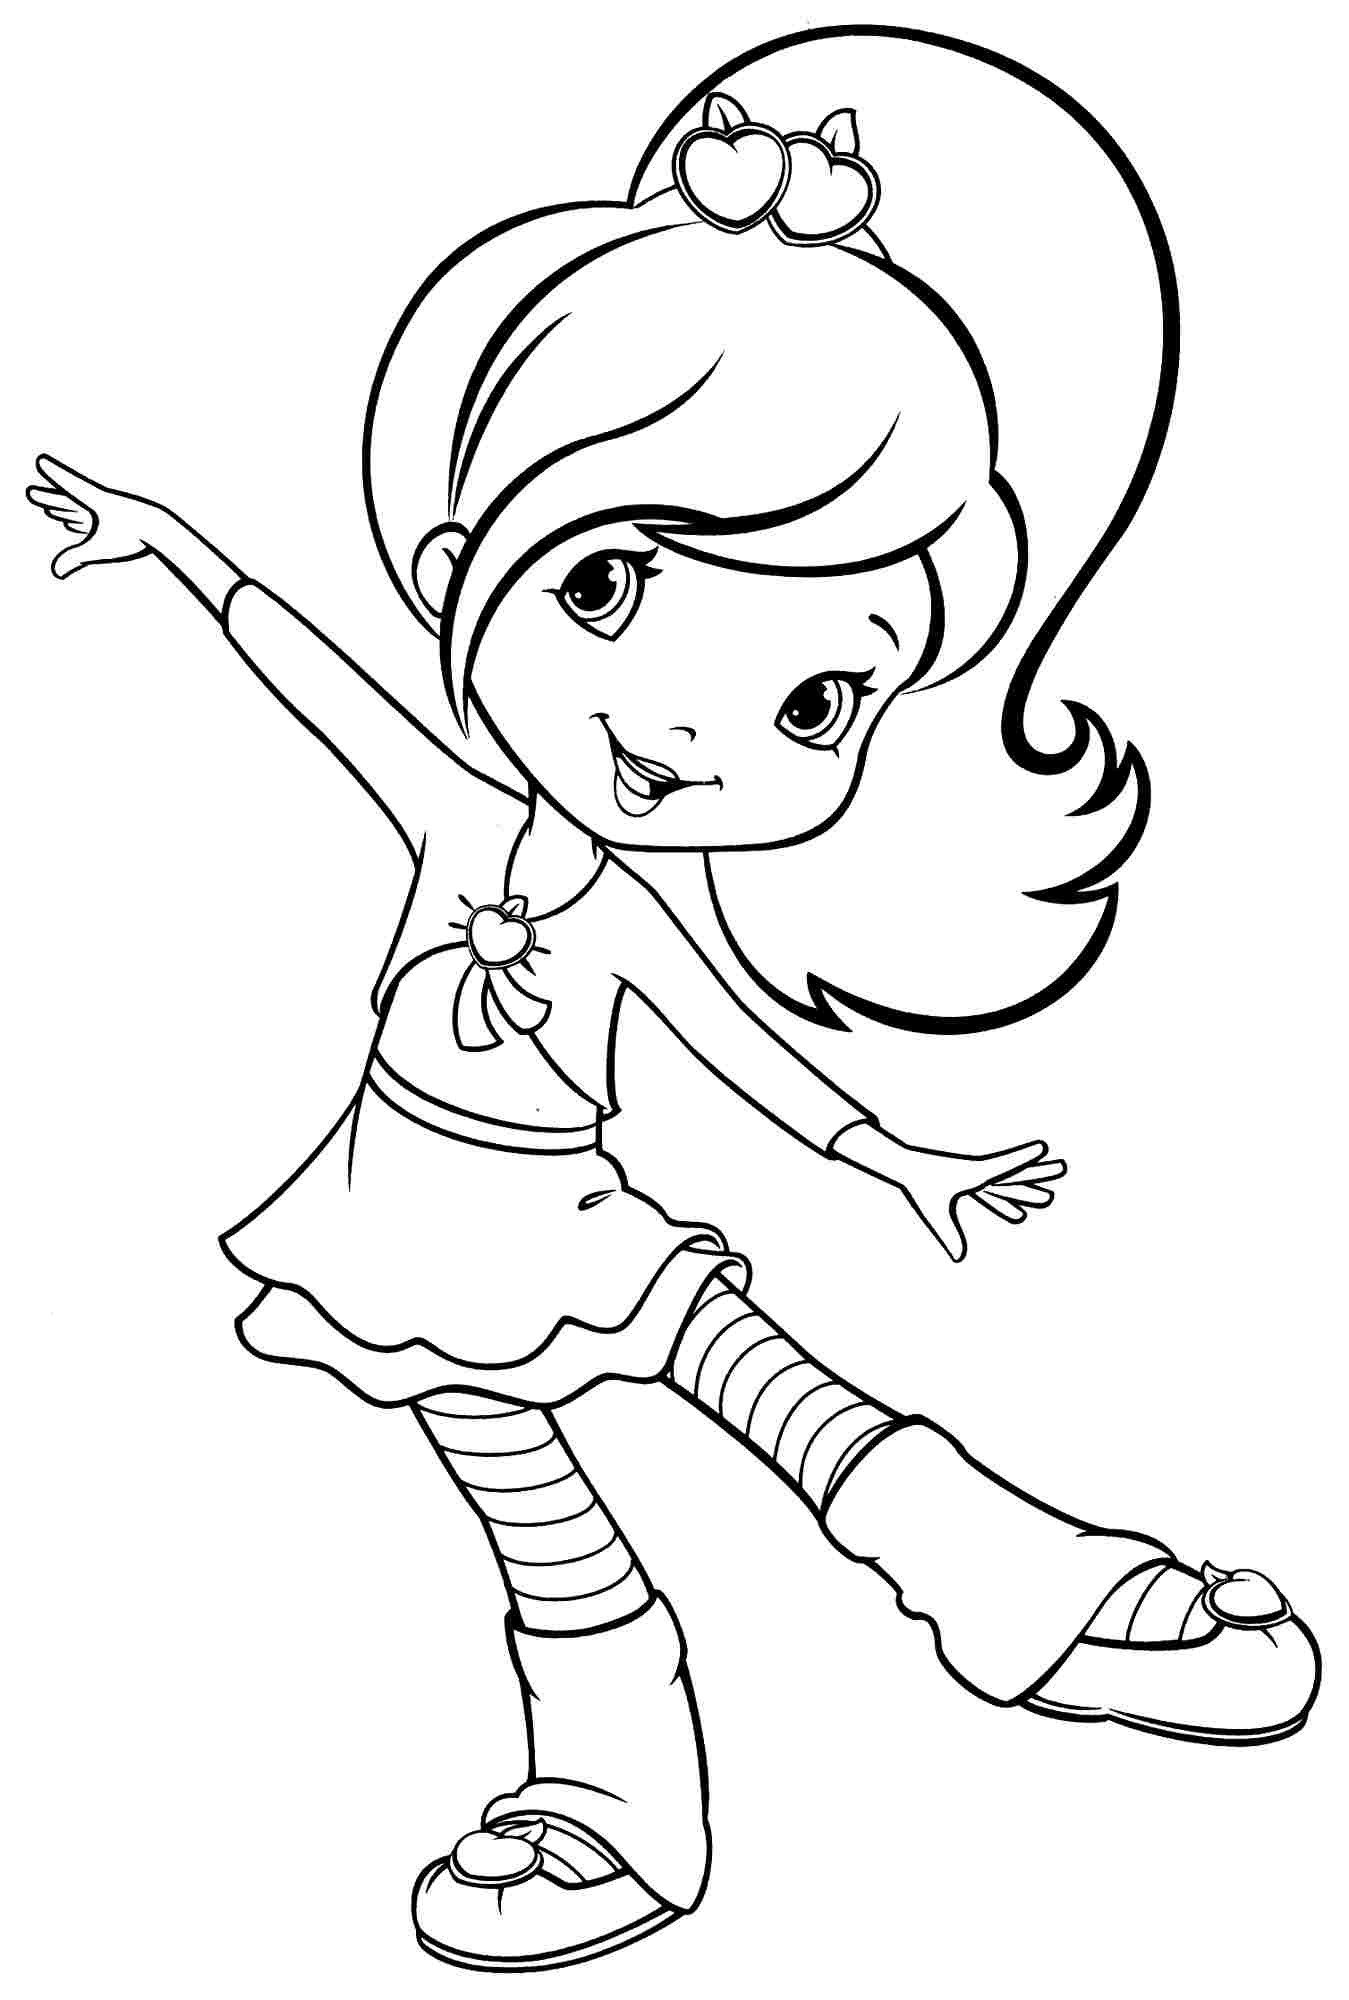 Coloring Sheets For Girls To Prin
 Coloring Pages for Girls Best Coloring Pages For Kids